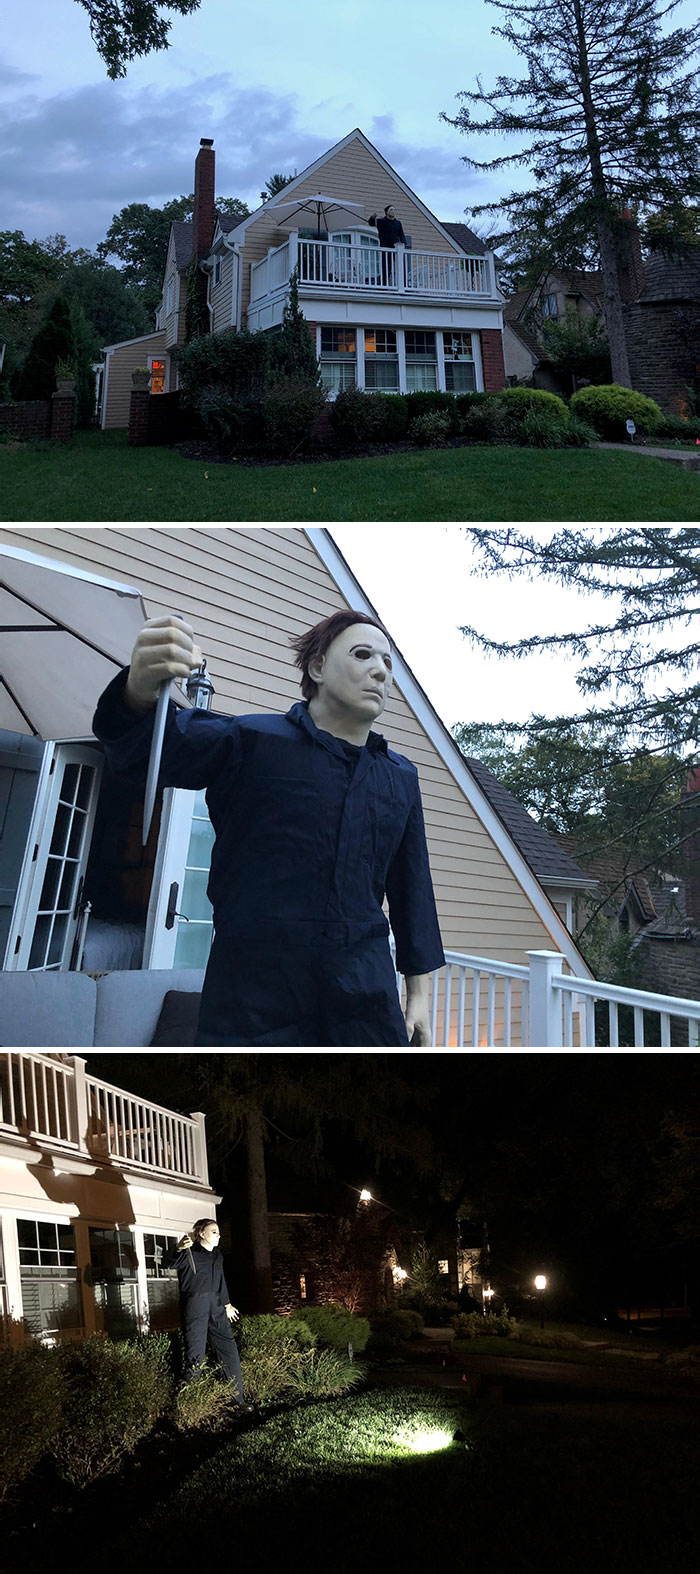 Living In Haddonfield, There's Only One Prop We Use For Decoration